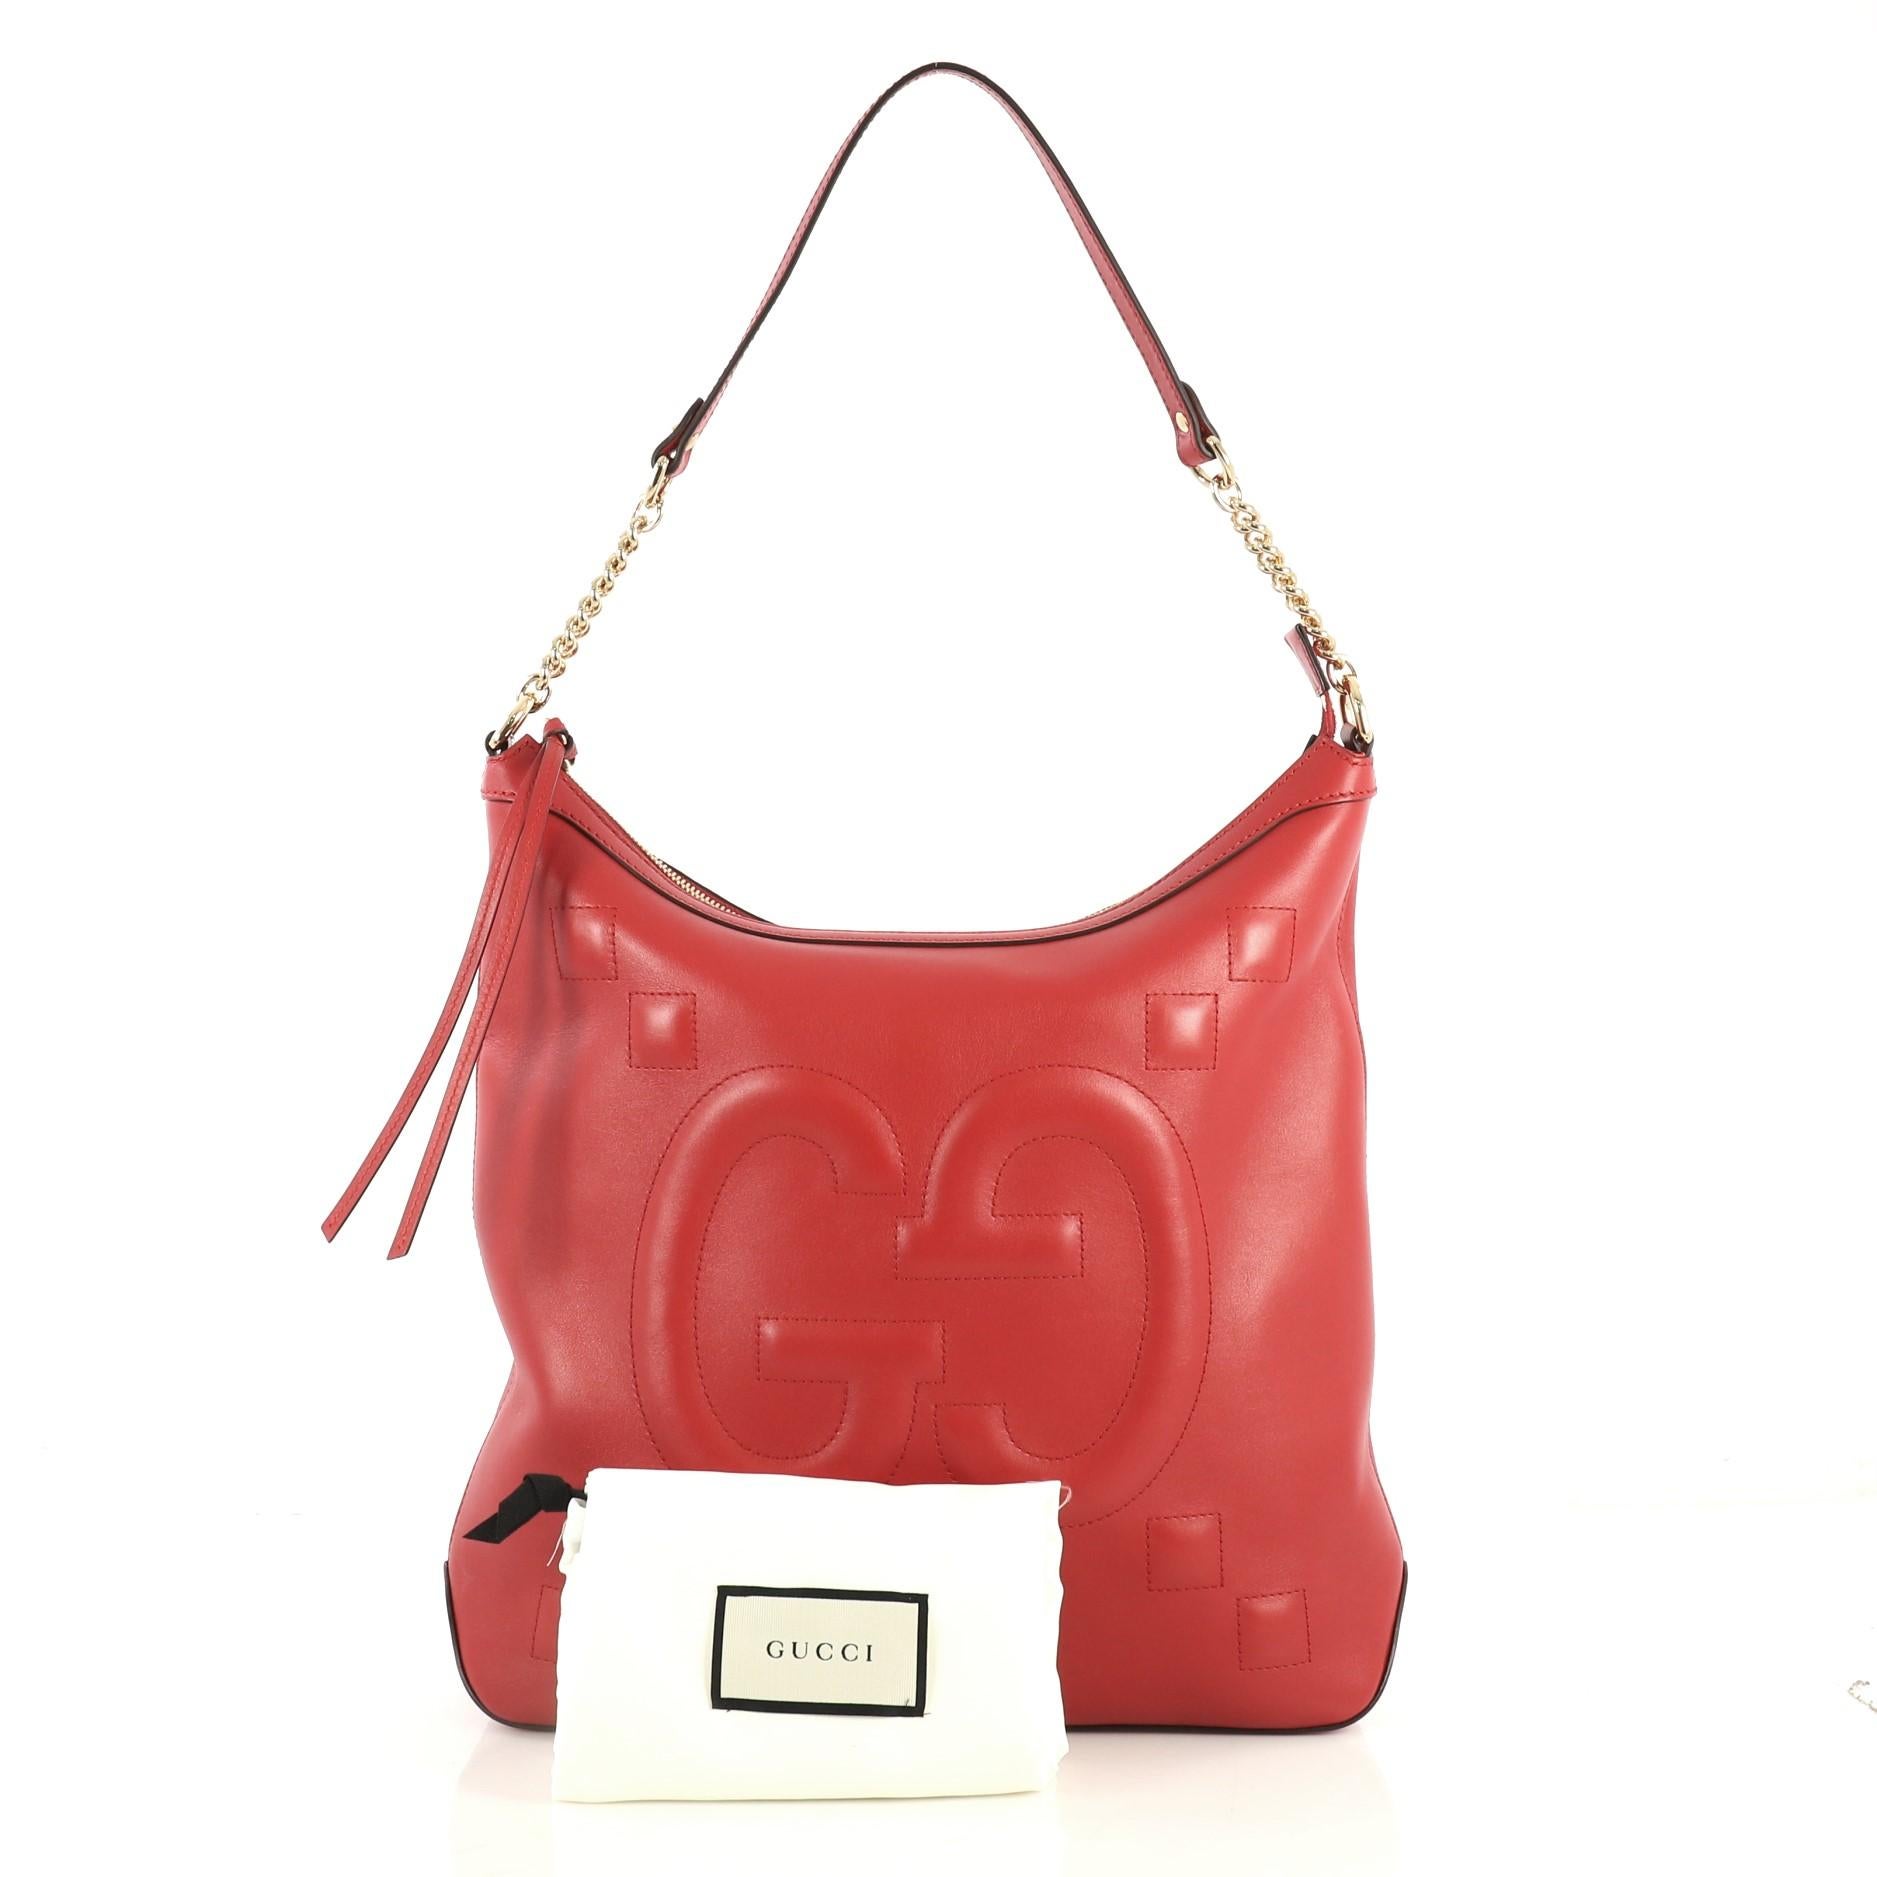 This Gucci Apollo Shoulder Bag GucciGhost Embossed Leather Large, crafted in red embossed leather, features chain link strap with leather and gold-tone hardware. Its zip closure opens to a neutral microfiber interior with zip and slip pockets.